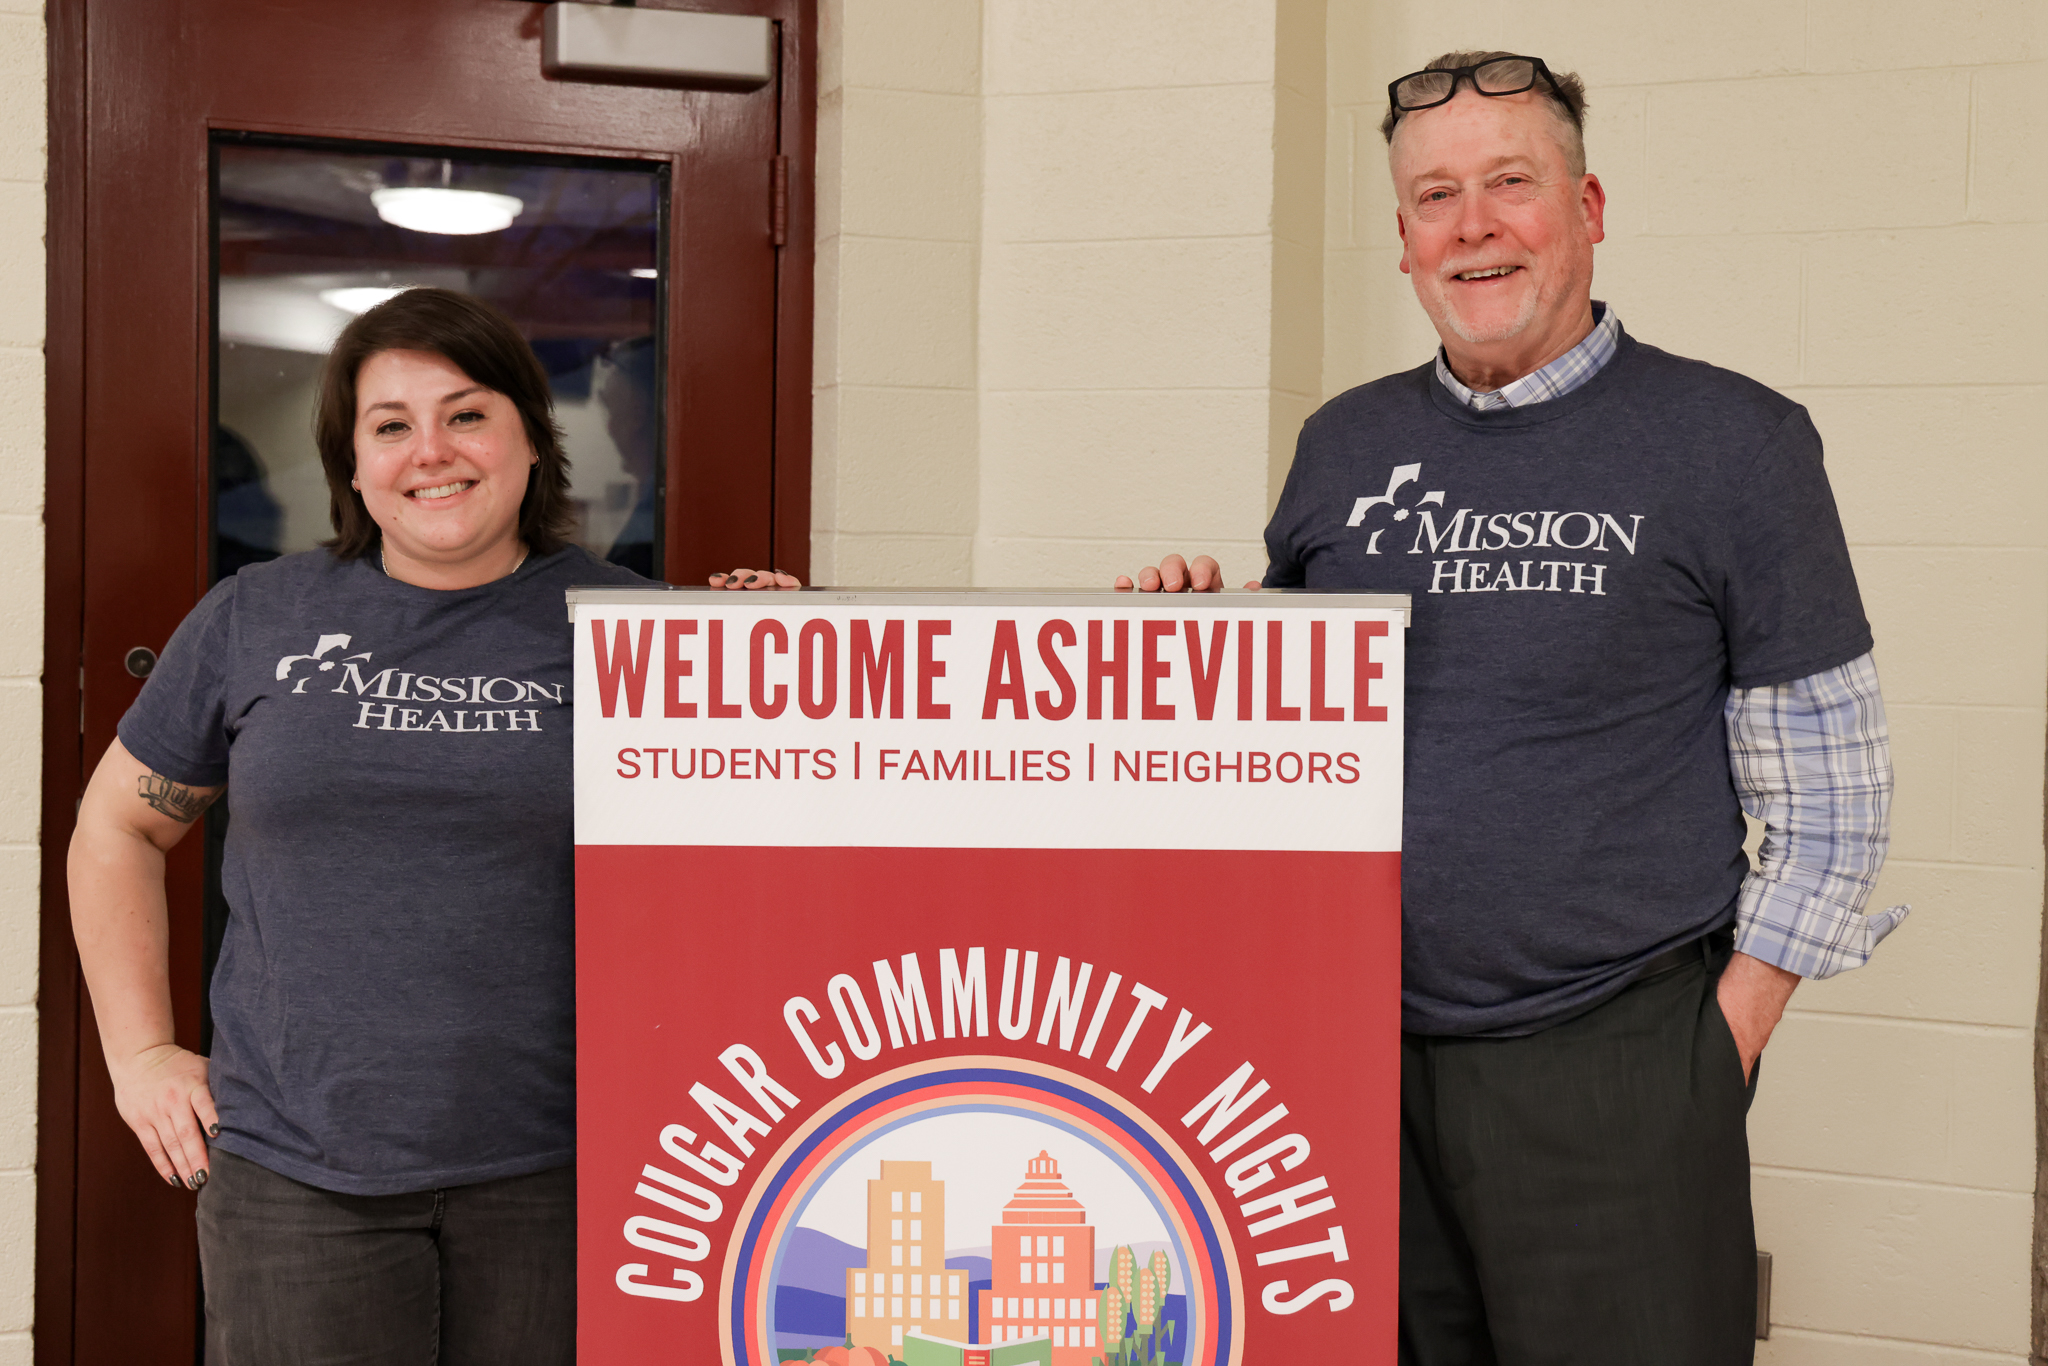 Mission Health employees volunteered their time and skills at Asheville High School Community Night